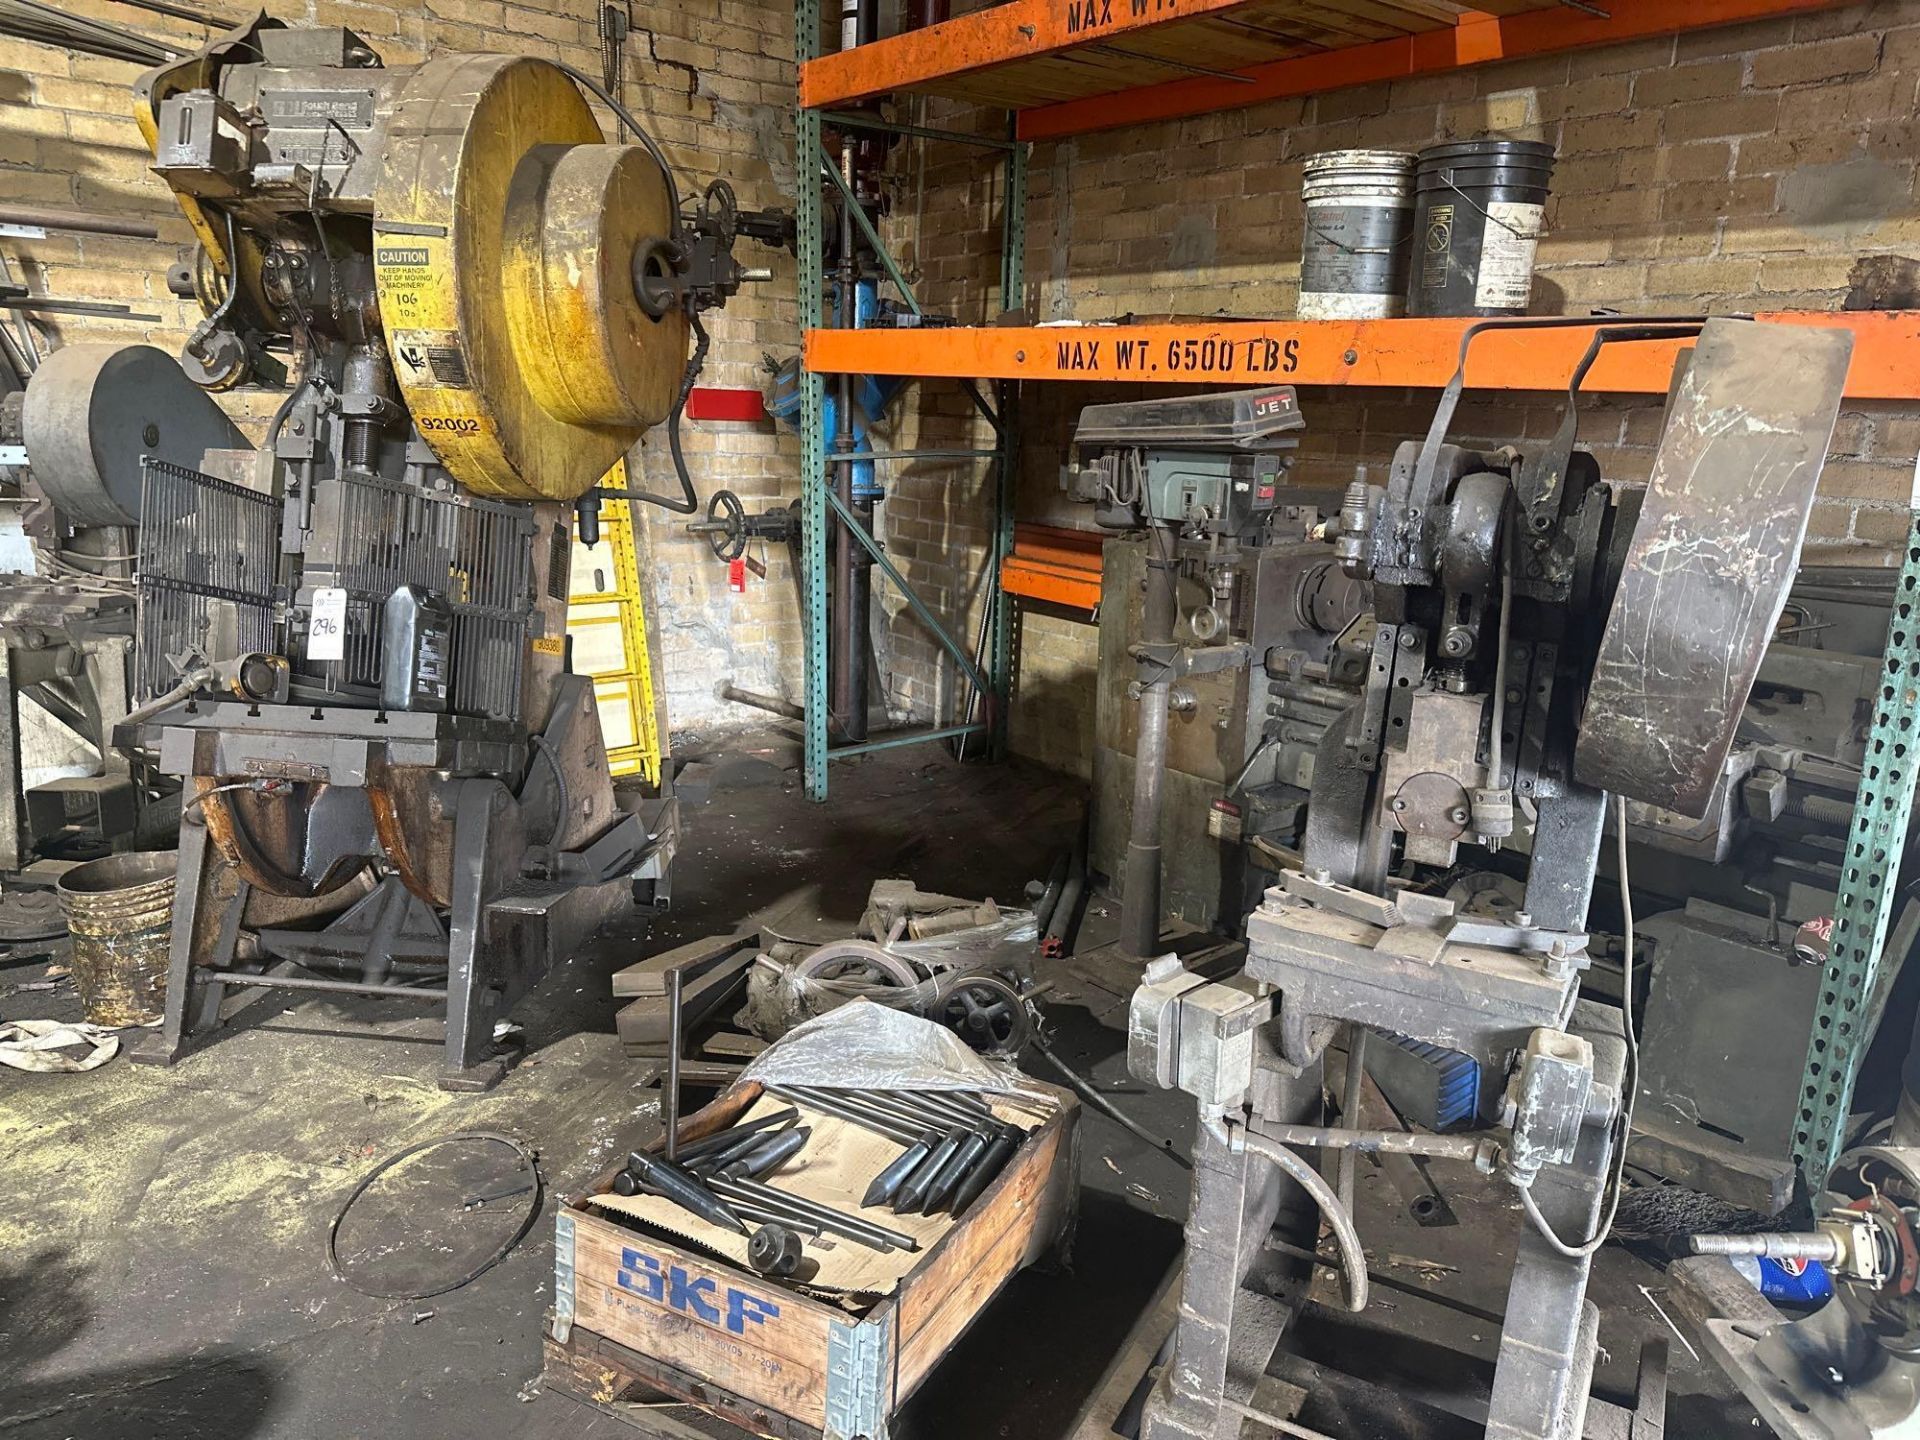 (2) OBI PRESSES (ROUSSELLE AND SOUTH BEND), SUMMIT LATHE, (2) DRILL PRESSES